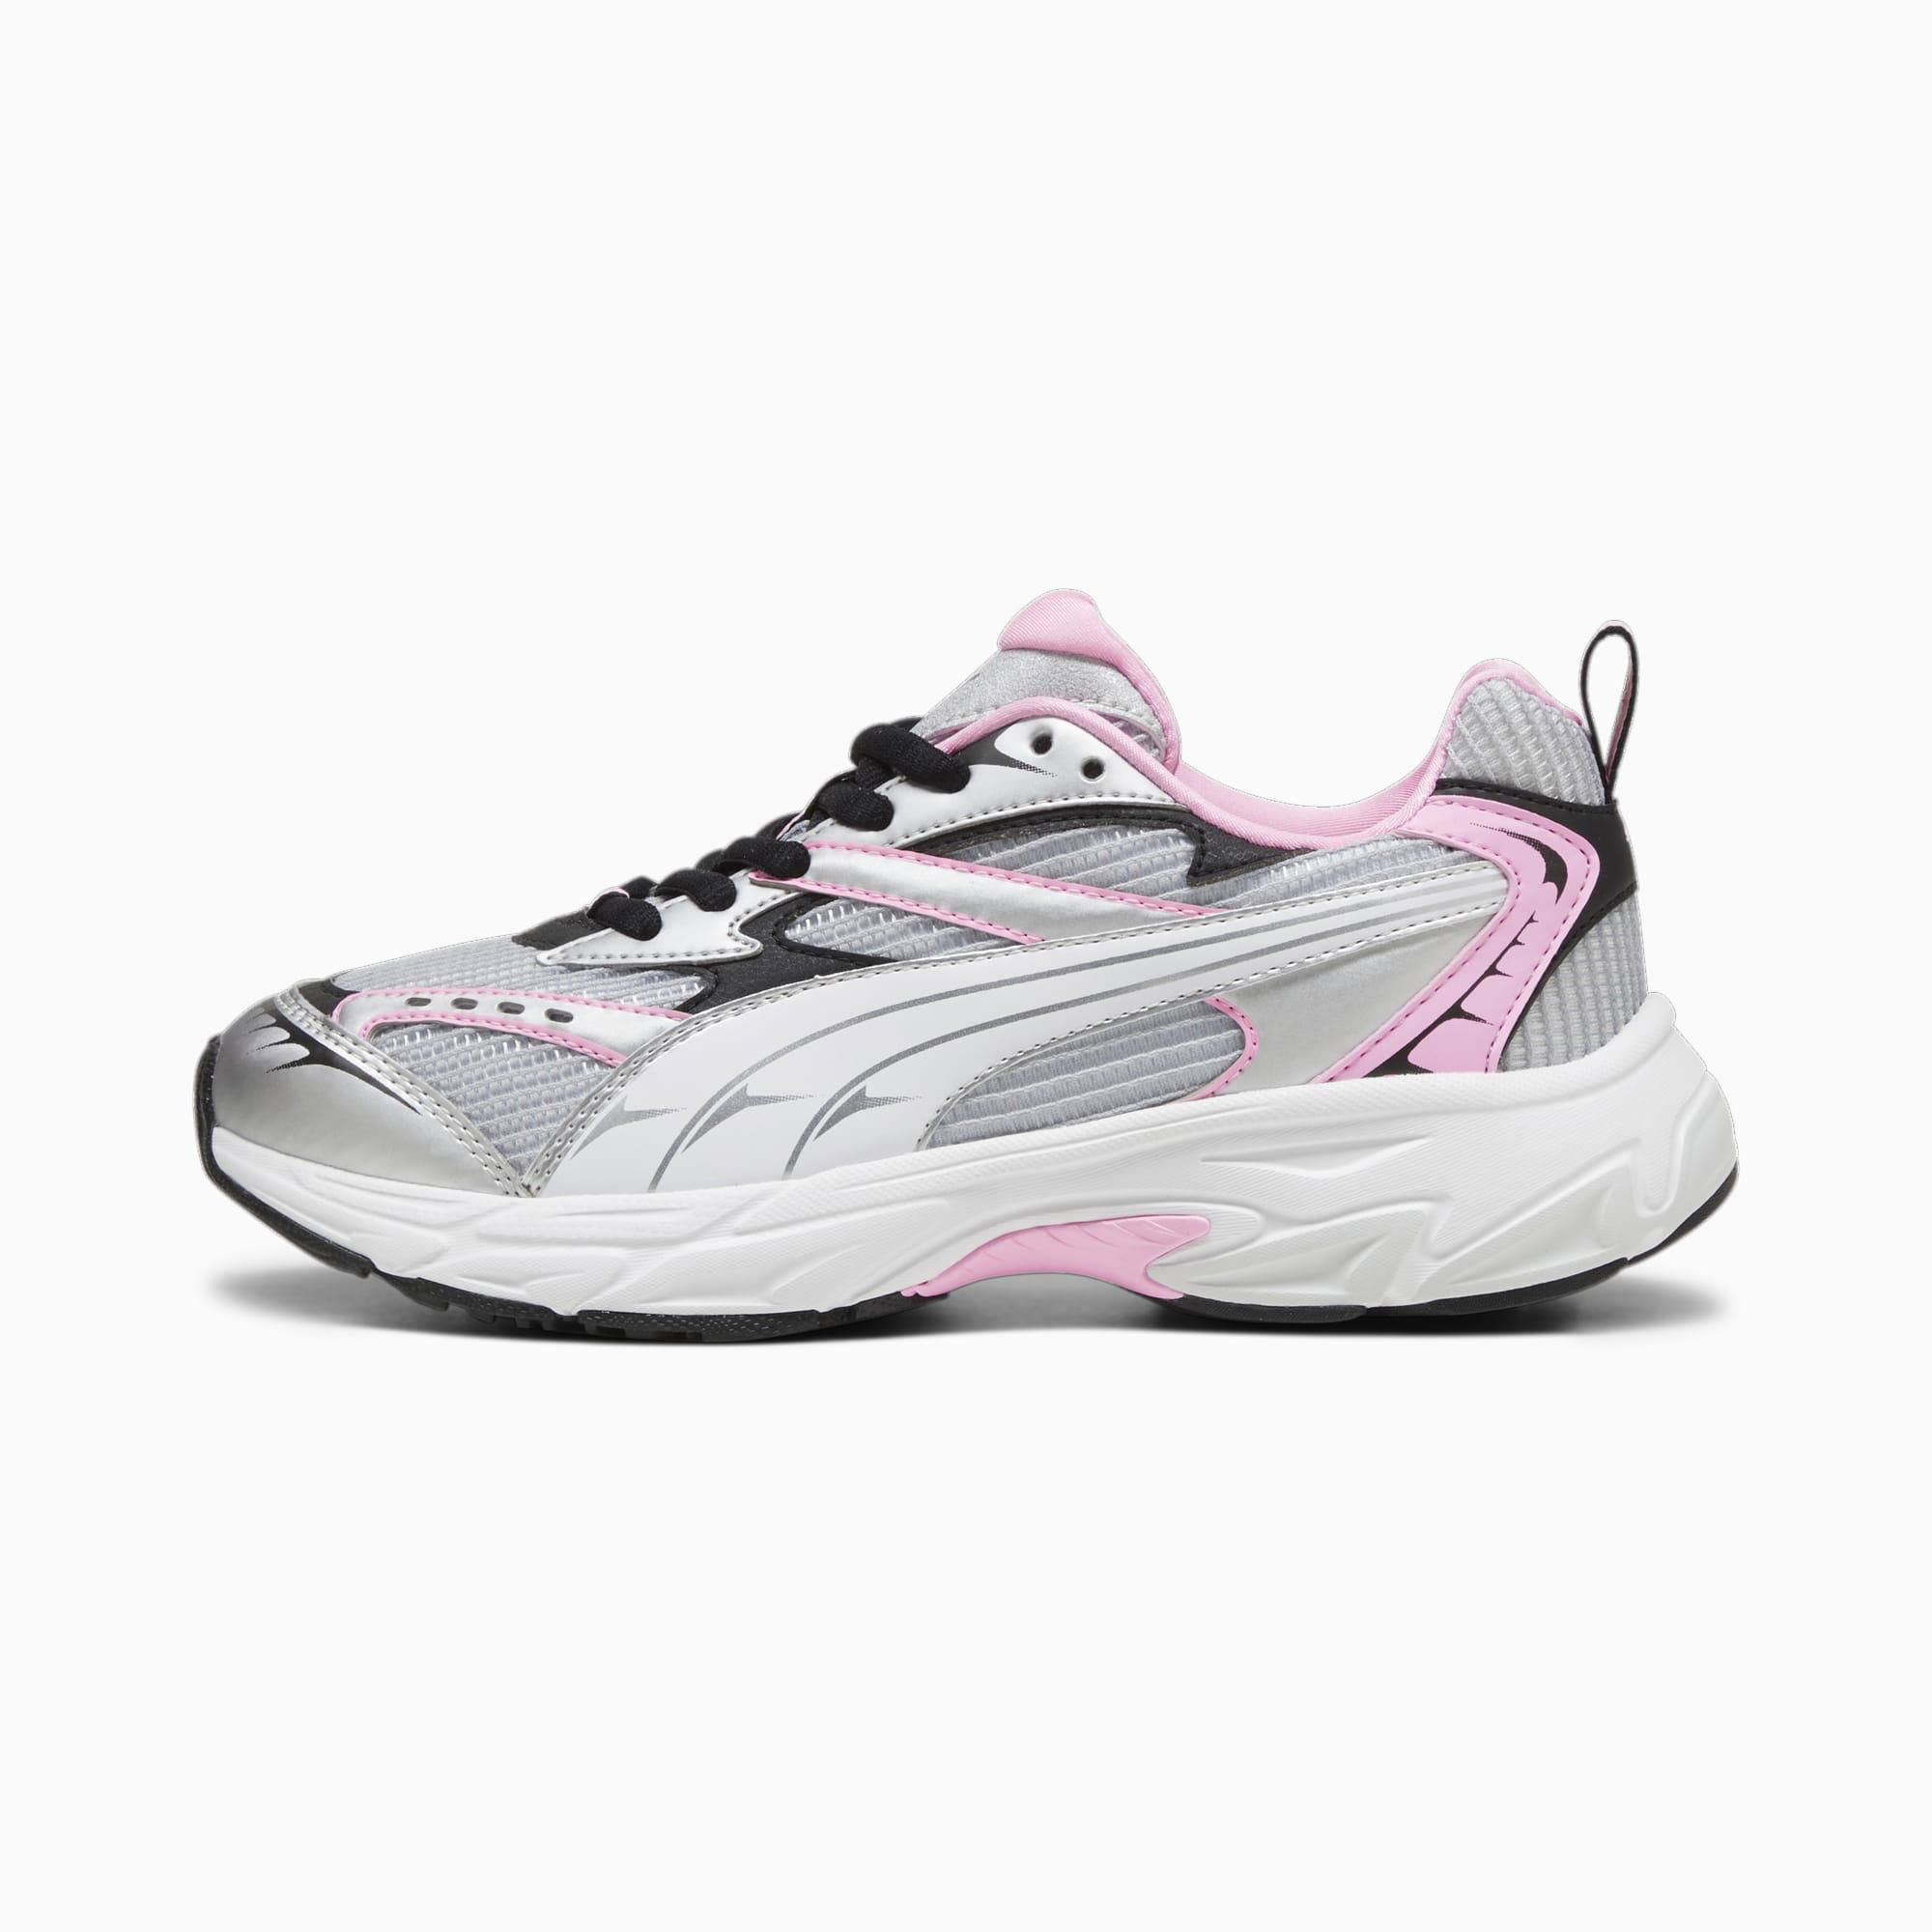 PUMA Morphic Athletic Sneakers by PUMA